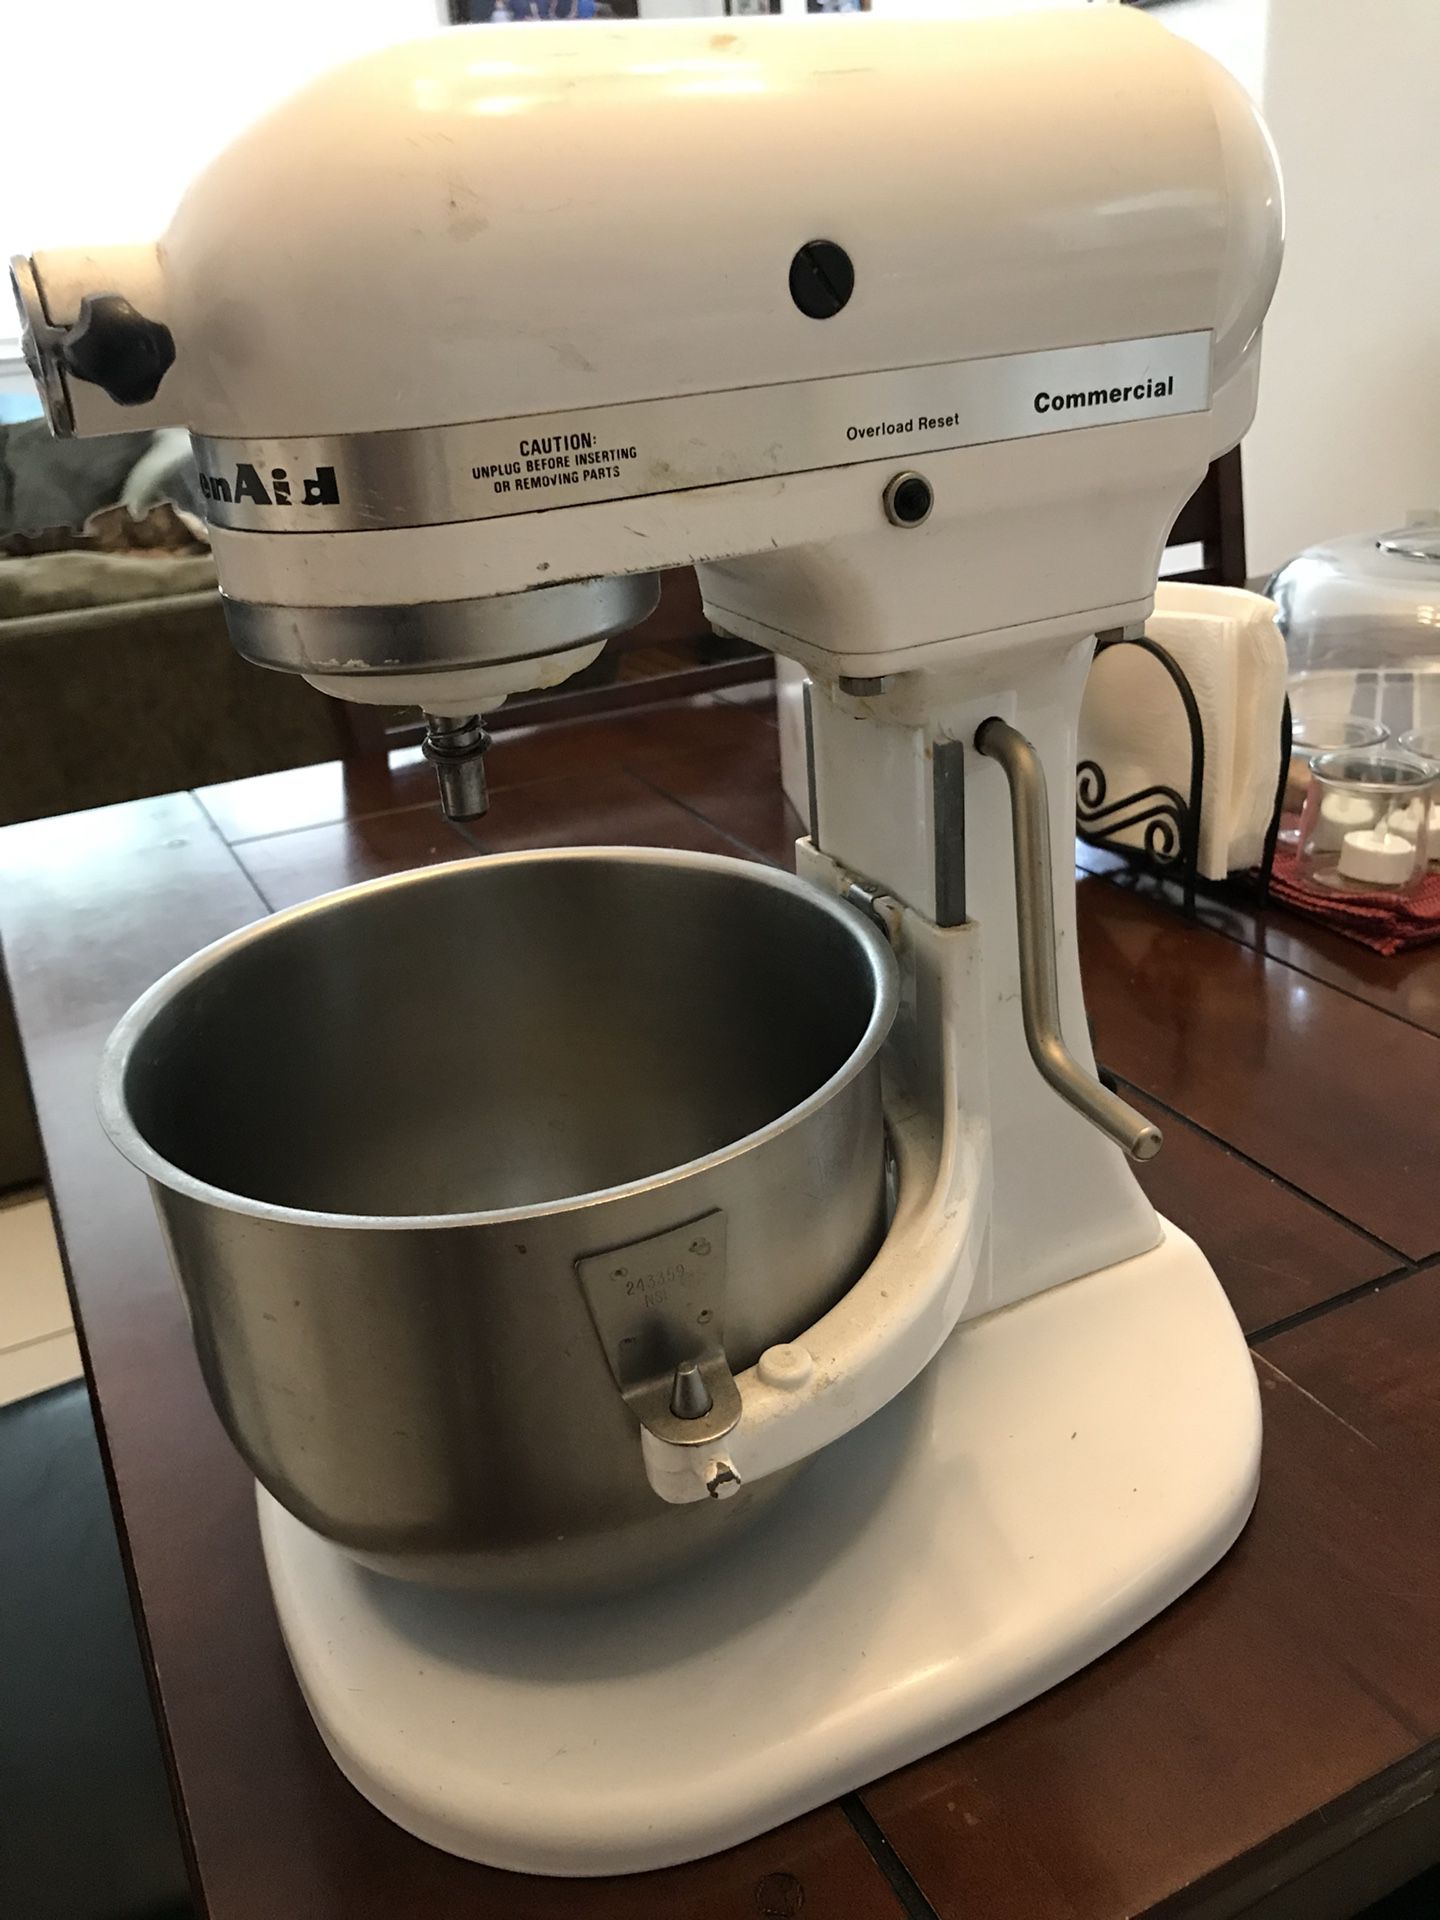 Kitchenaid Commercial 5 quart Stand Mixer KSMC50S with Bowl and